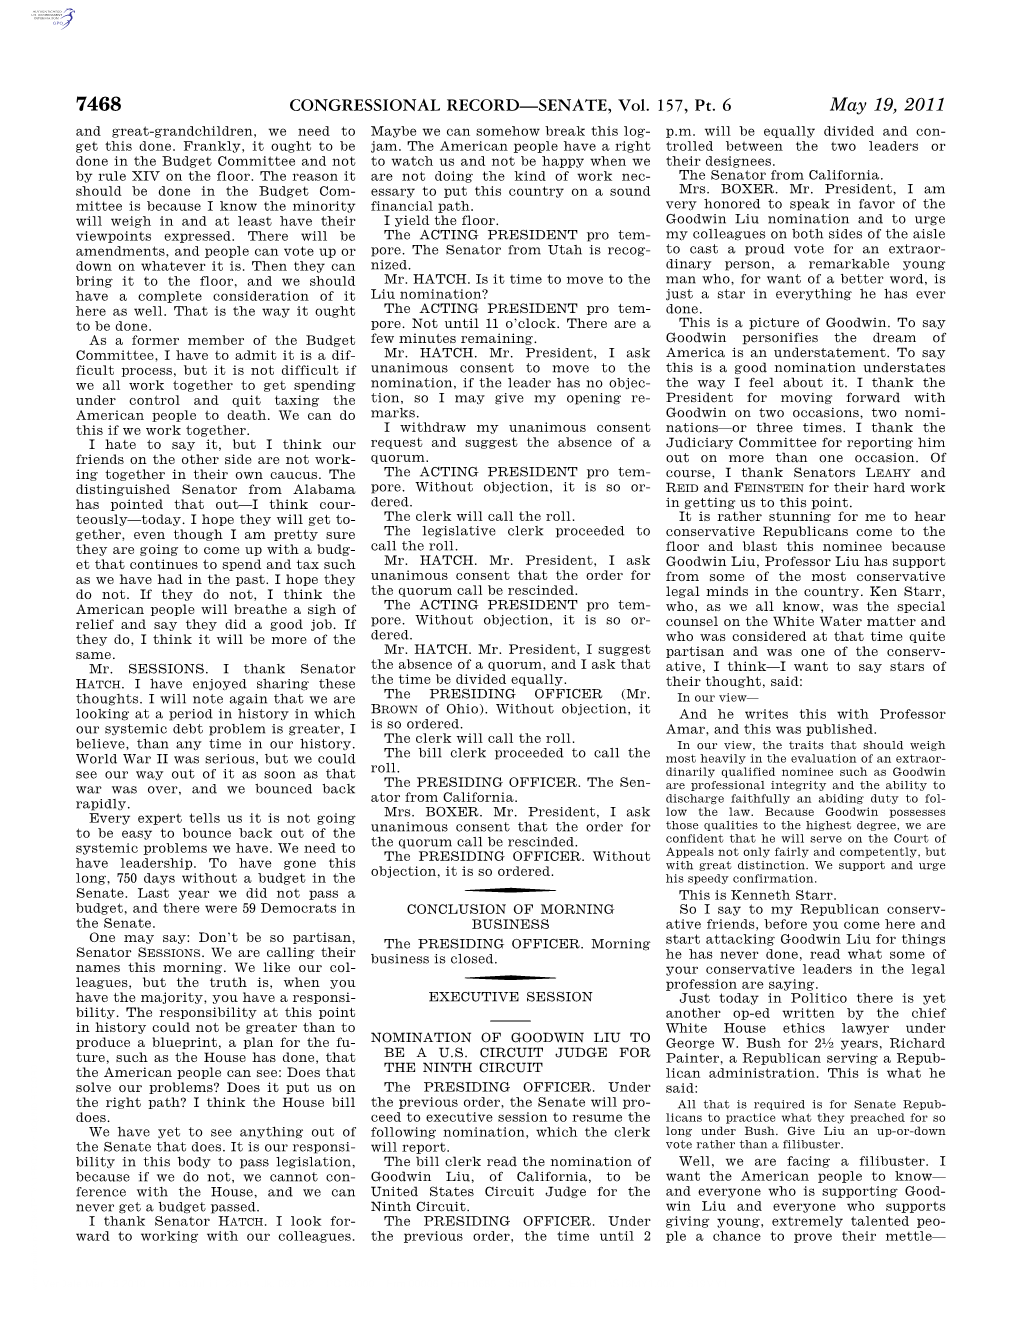 CONGRESSIONAL RECORD—SENATE, Vol. 157, Pt. 6 May 19, 2011 and Great-Grandchildren, We Need to Maybe We Can Somehow Break This Log- P.M